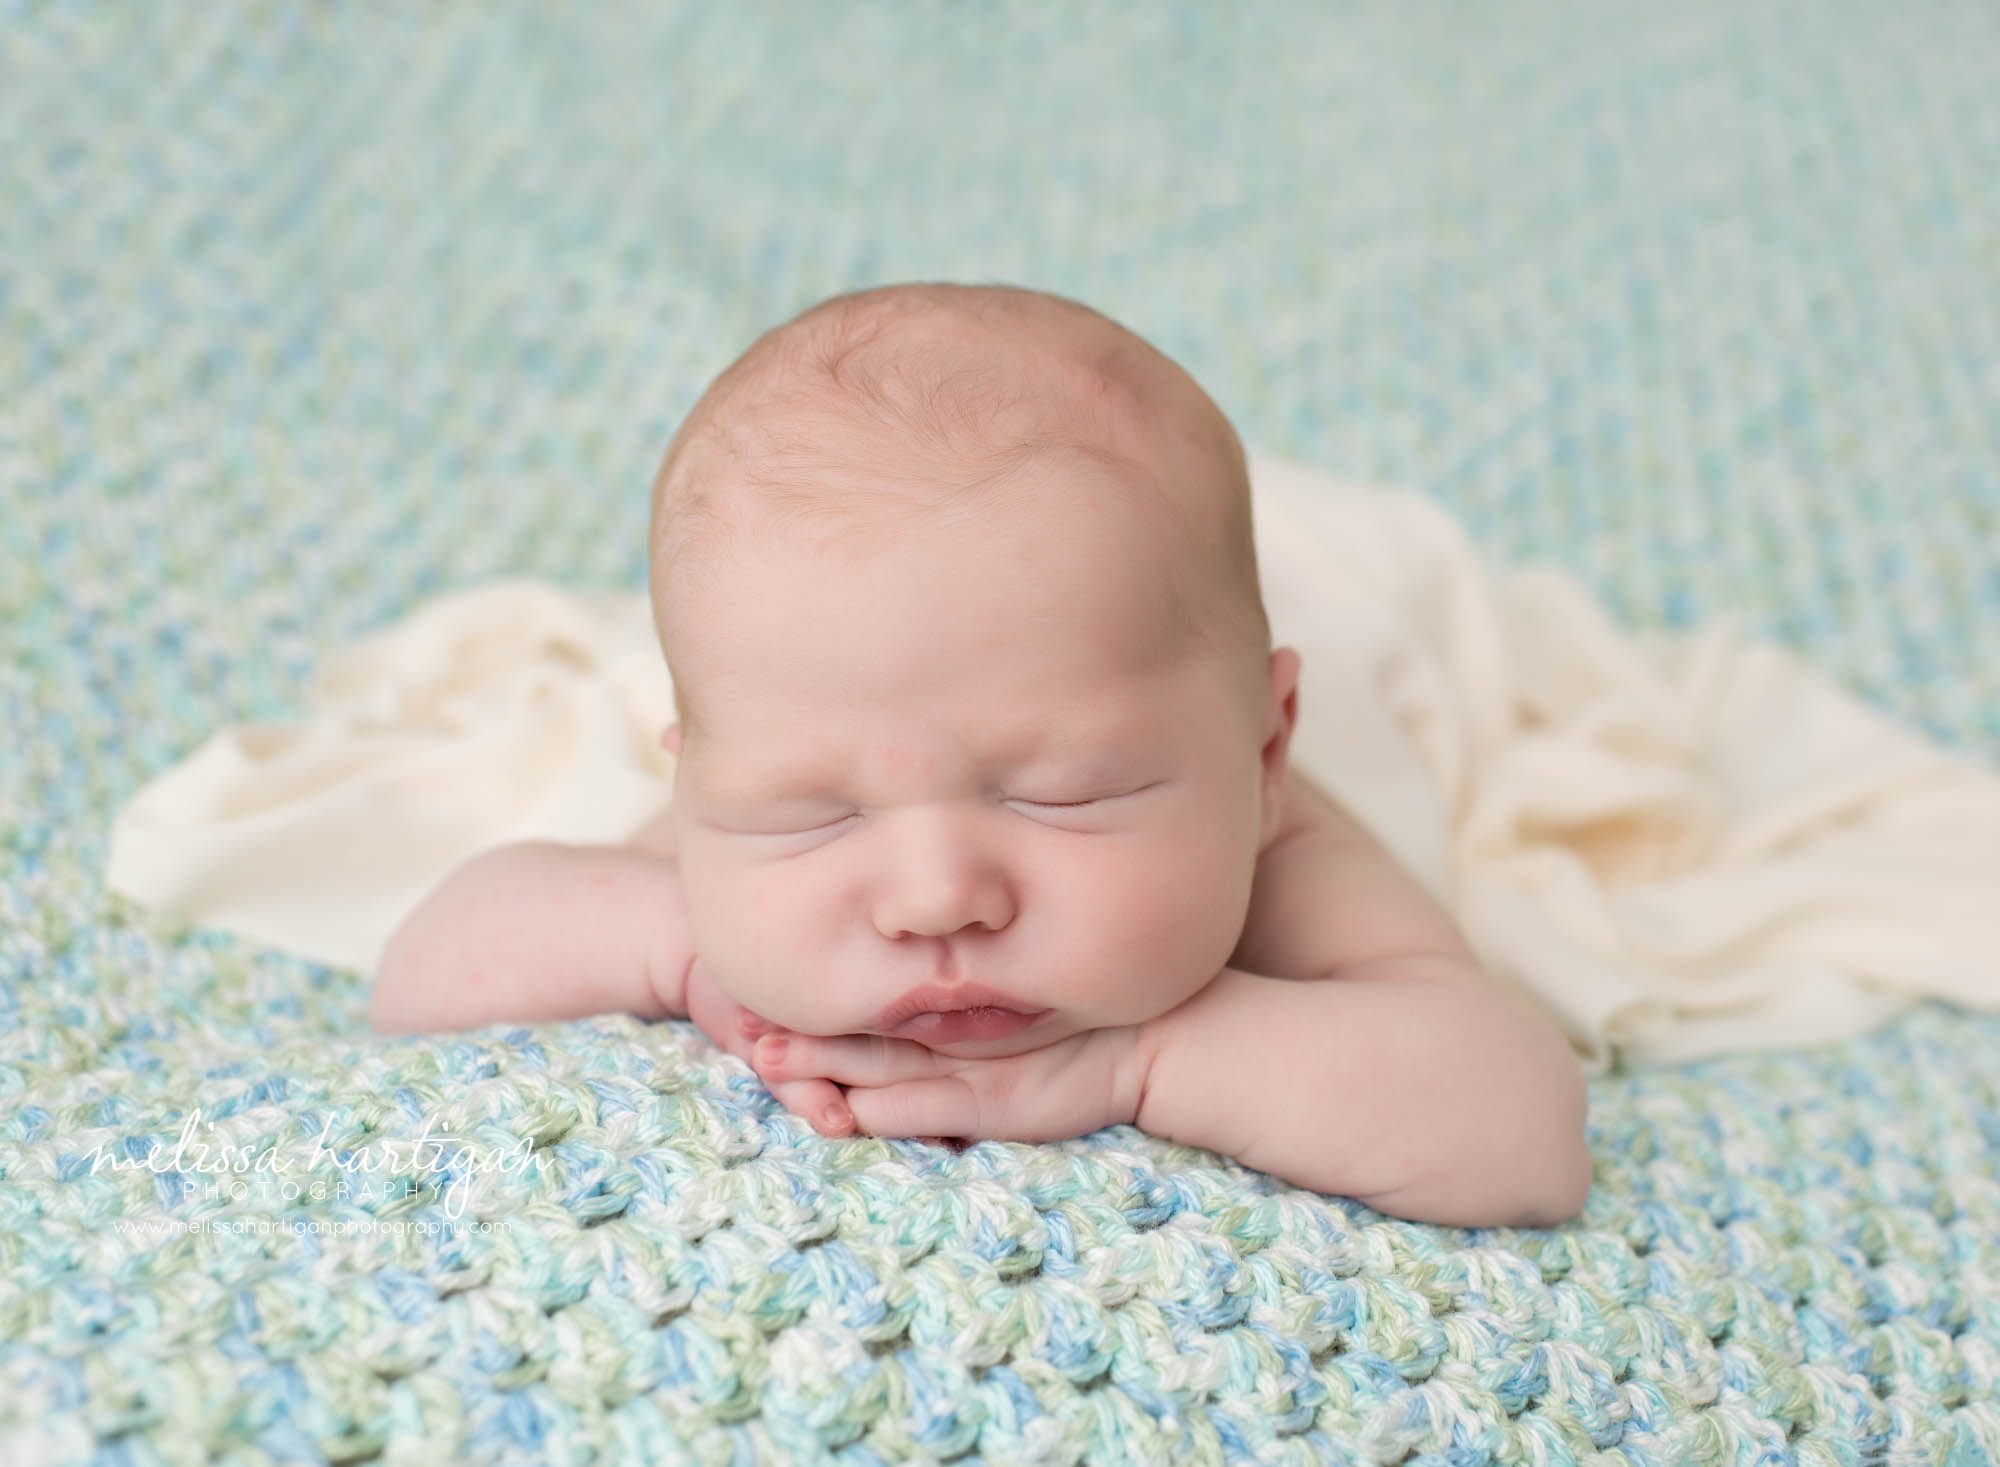 Baby boy posed on handmade knitted crocheted baby blanket with light green and light blue colors